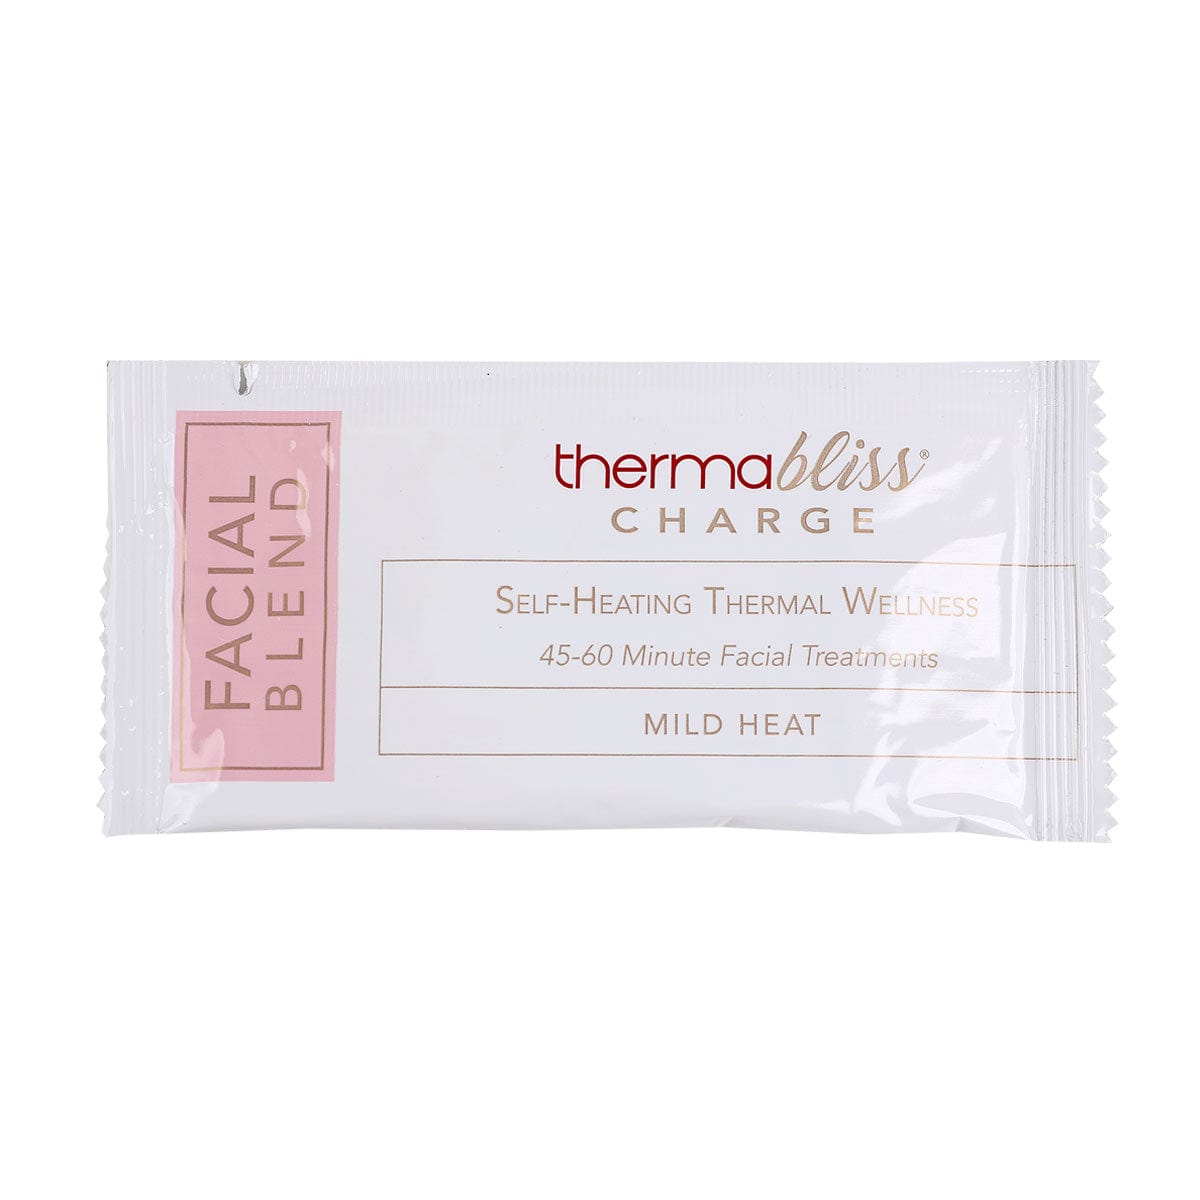 ThermaBliss Charge Facial Blend Mild Heat (36 treatments)